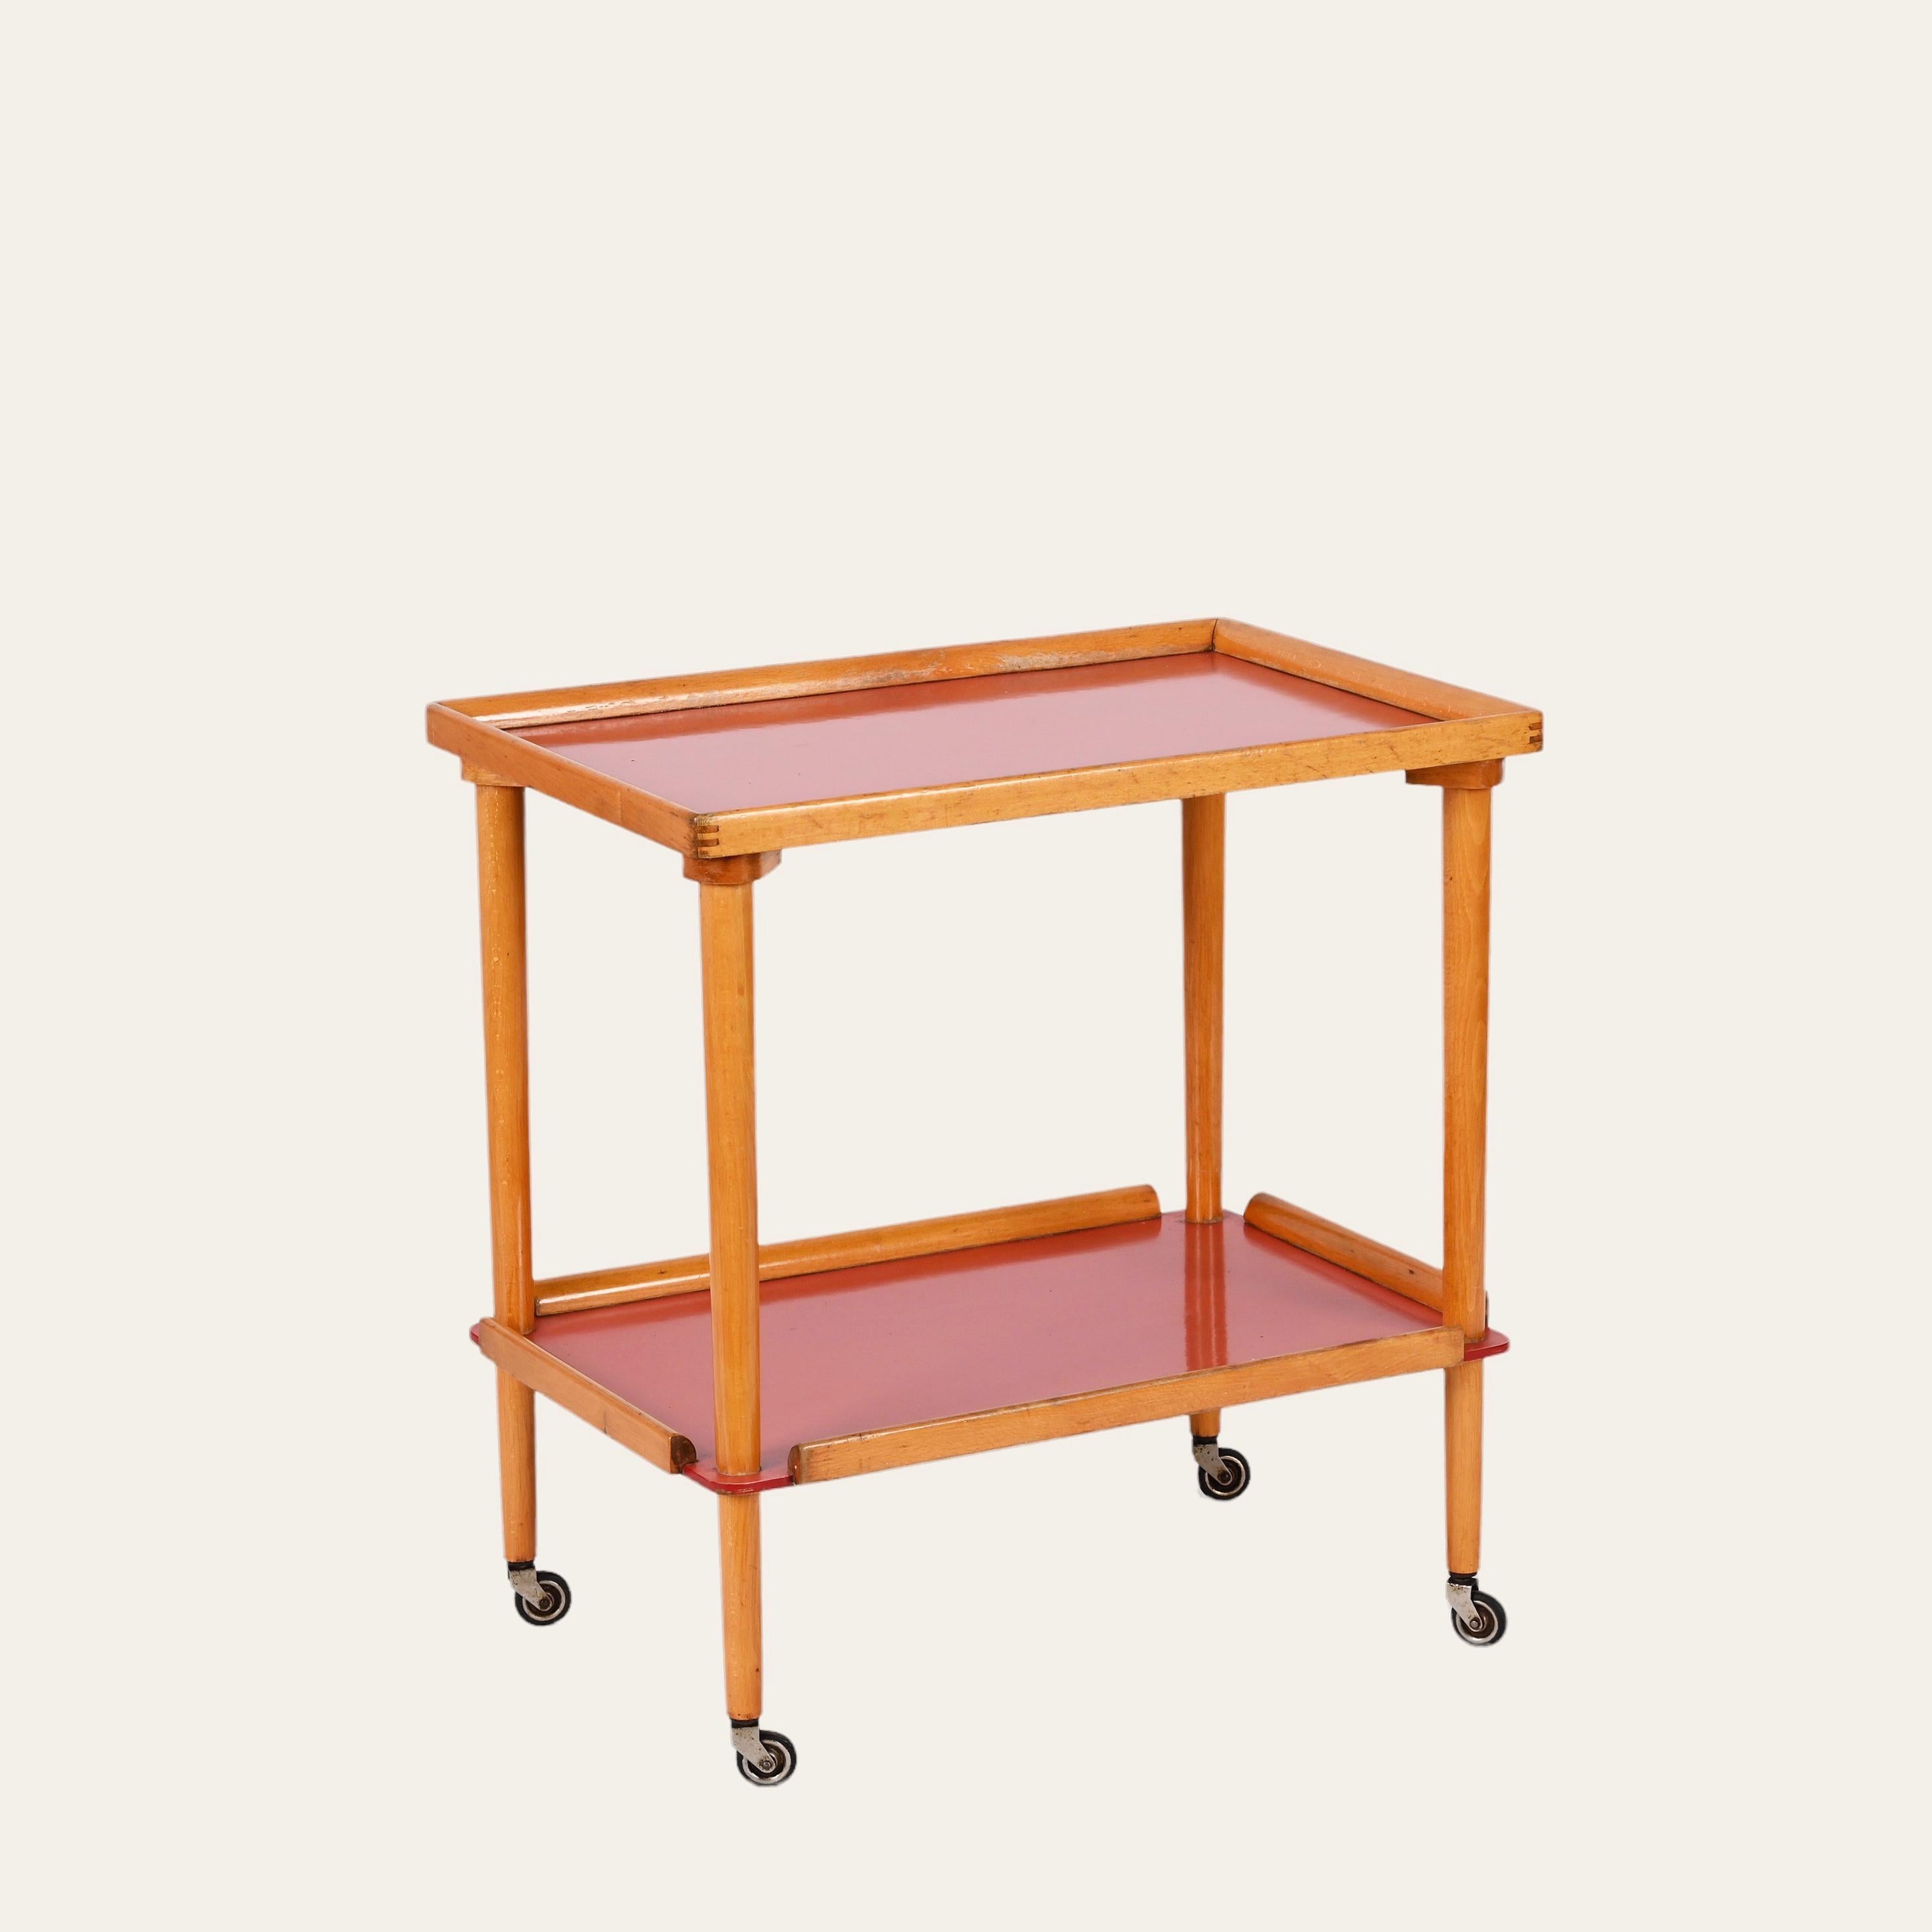 Metal Midcentury Italian Beech Wood and Formica Red Two Tiered Bar Cart, 1960s For Sale